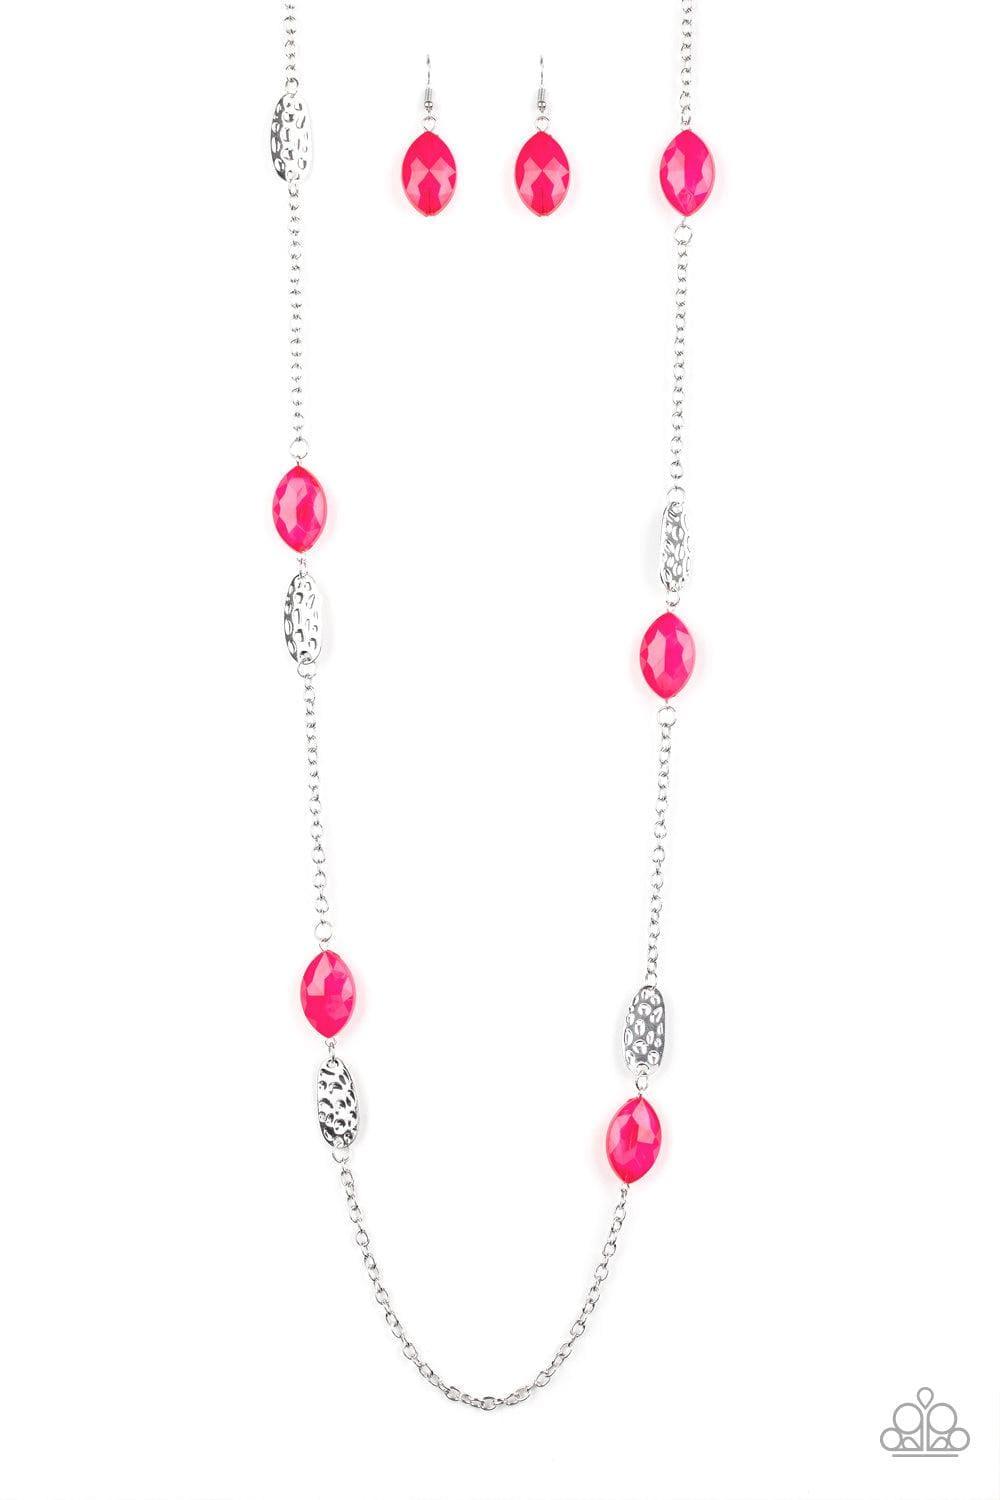 Paparazzi Accessories - Beachfront Beauty - Pink Necklace - Bling by JessieK